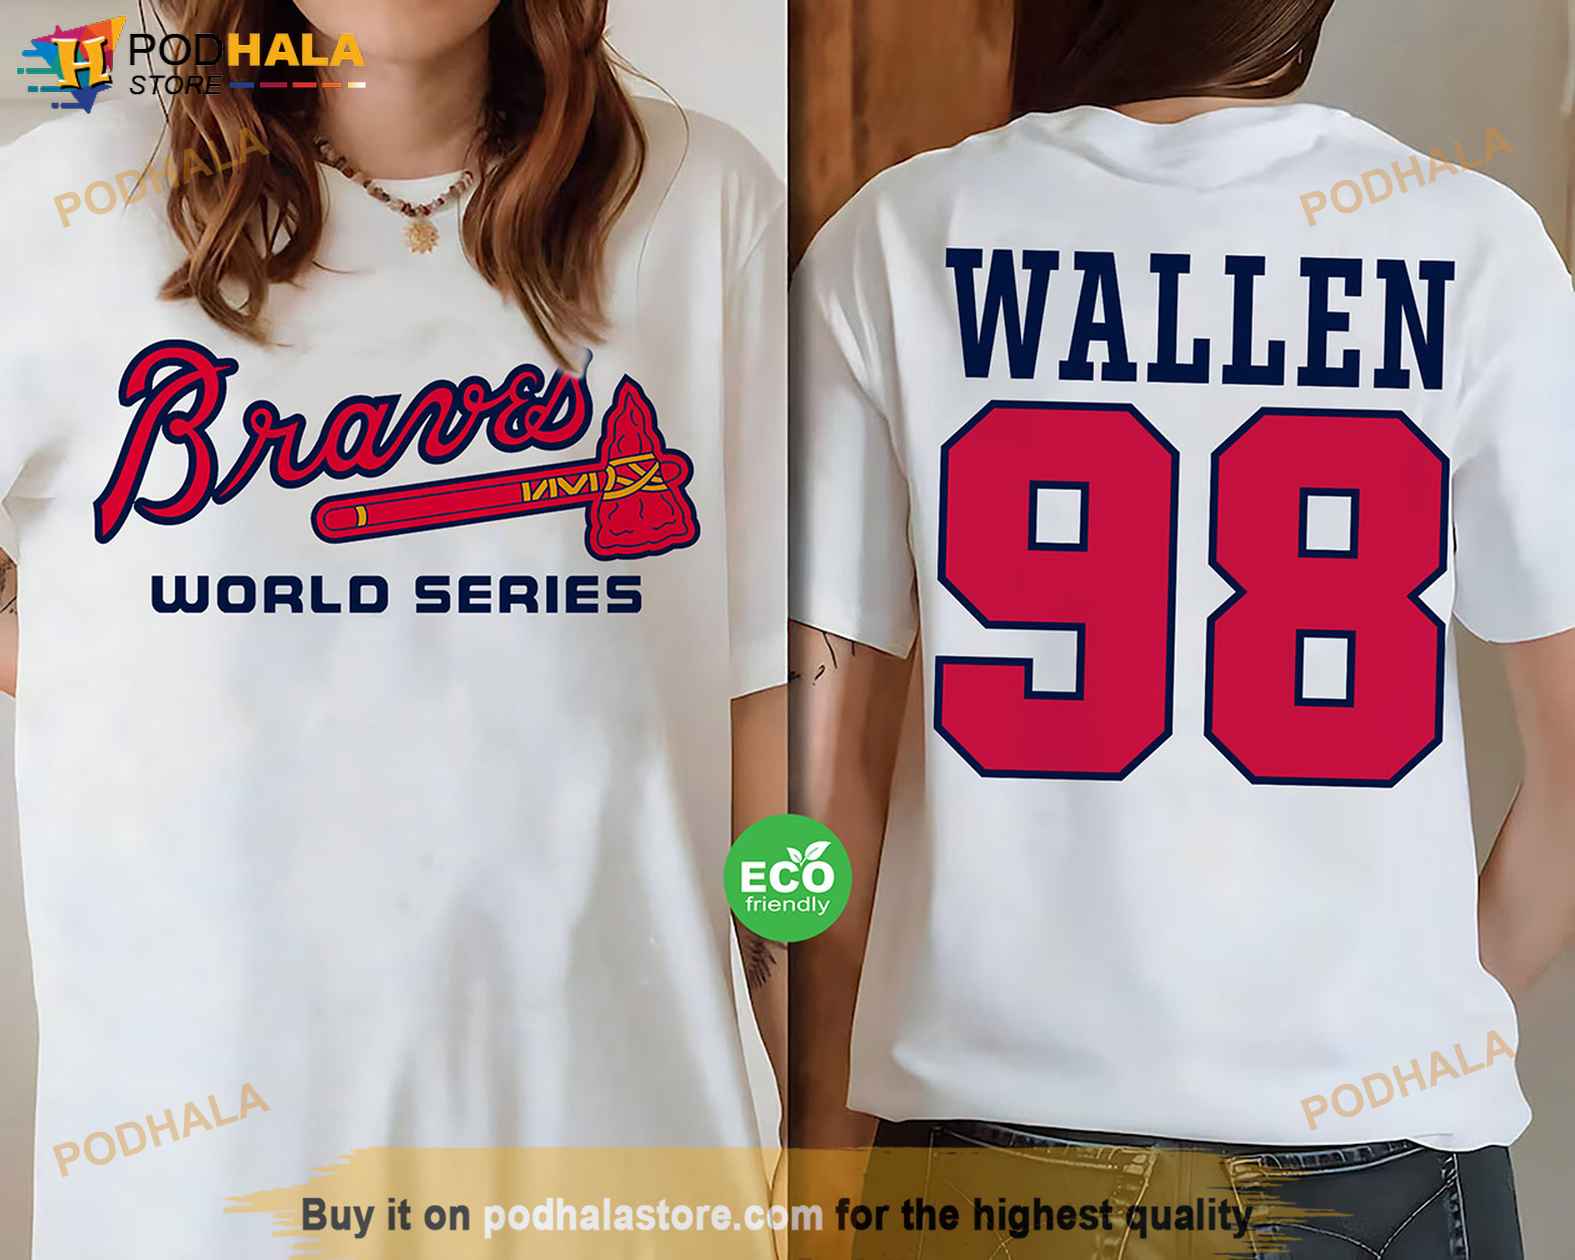 98 Braves Morgan Wallen Shirt, Morgan Fan Gift, Country Music Concert Shirt  - Bring Your Ideas, Thoughts And Imaginations Into Reality Today